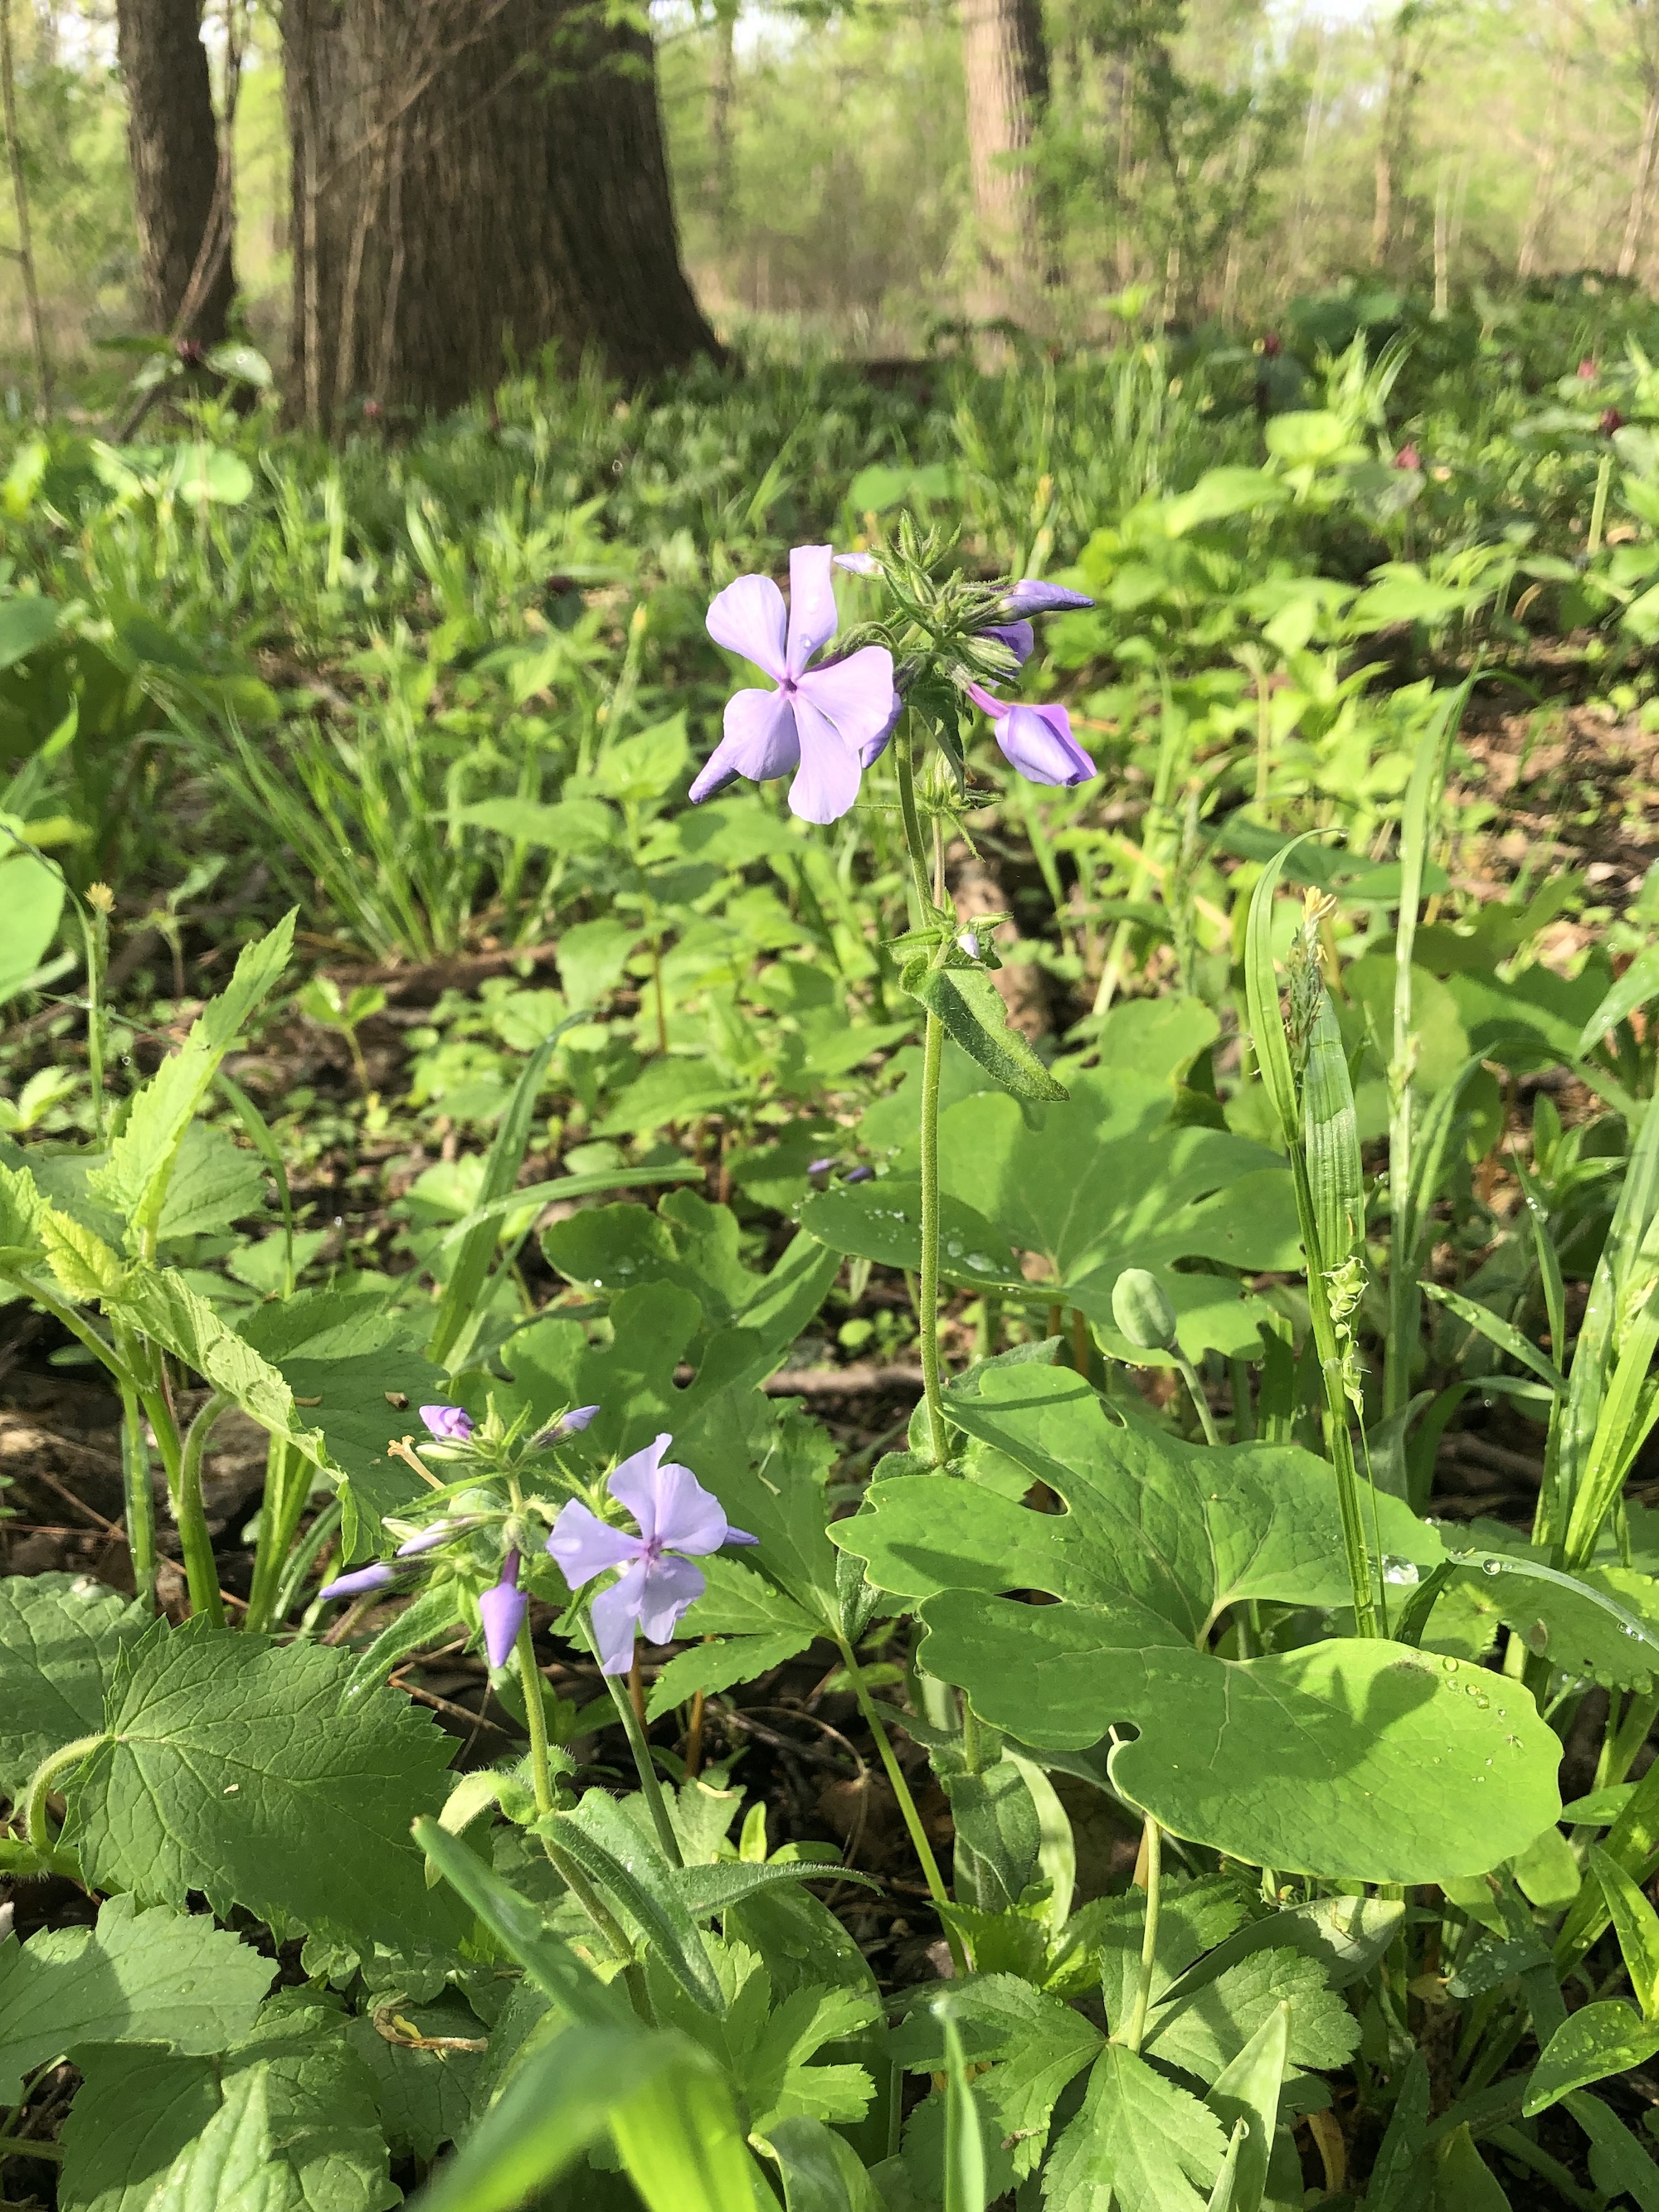 Woodland Phlox by Council Ring in Oak Savannin Madison, Wisconsin on May 14, 2022.